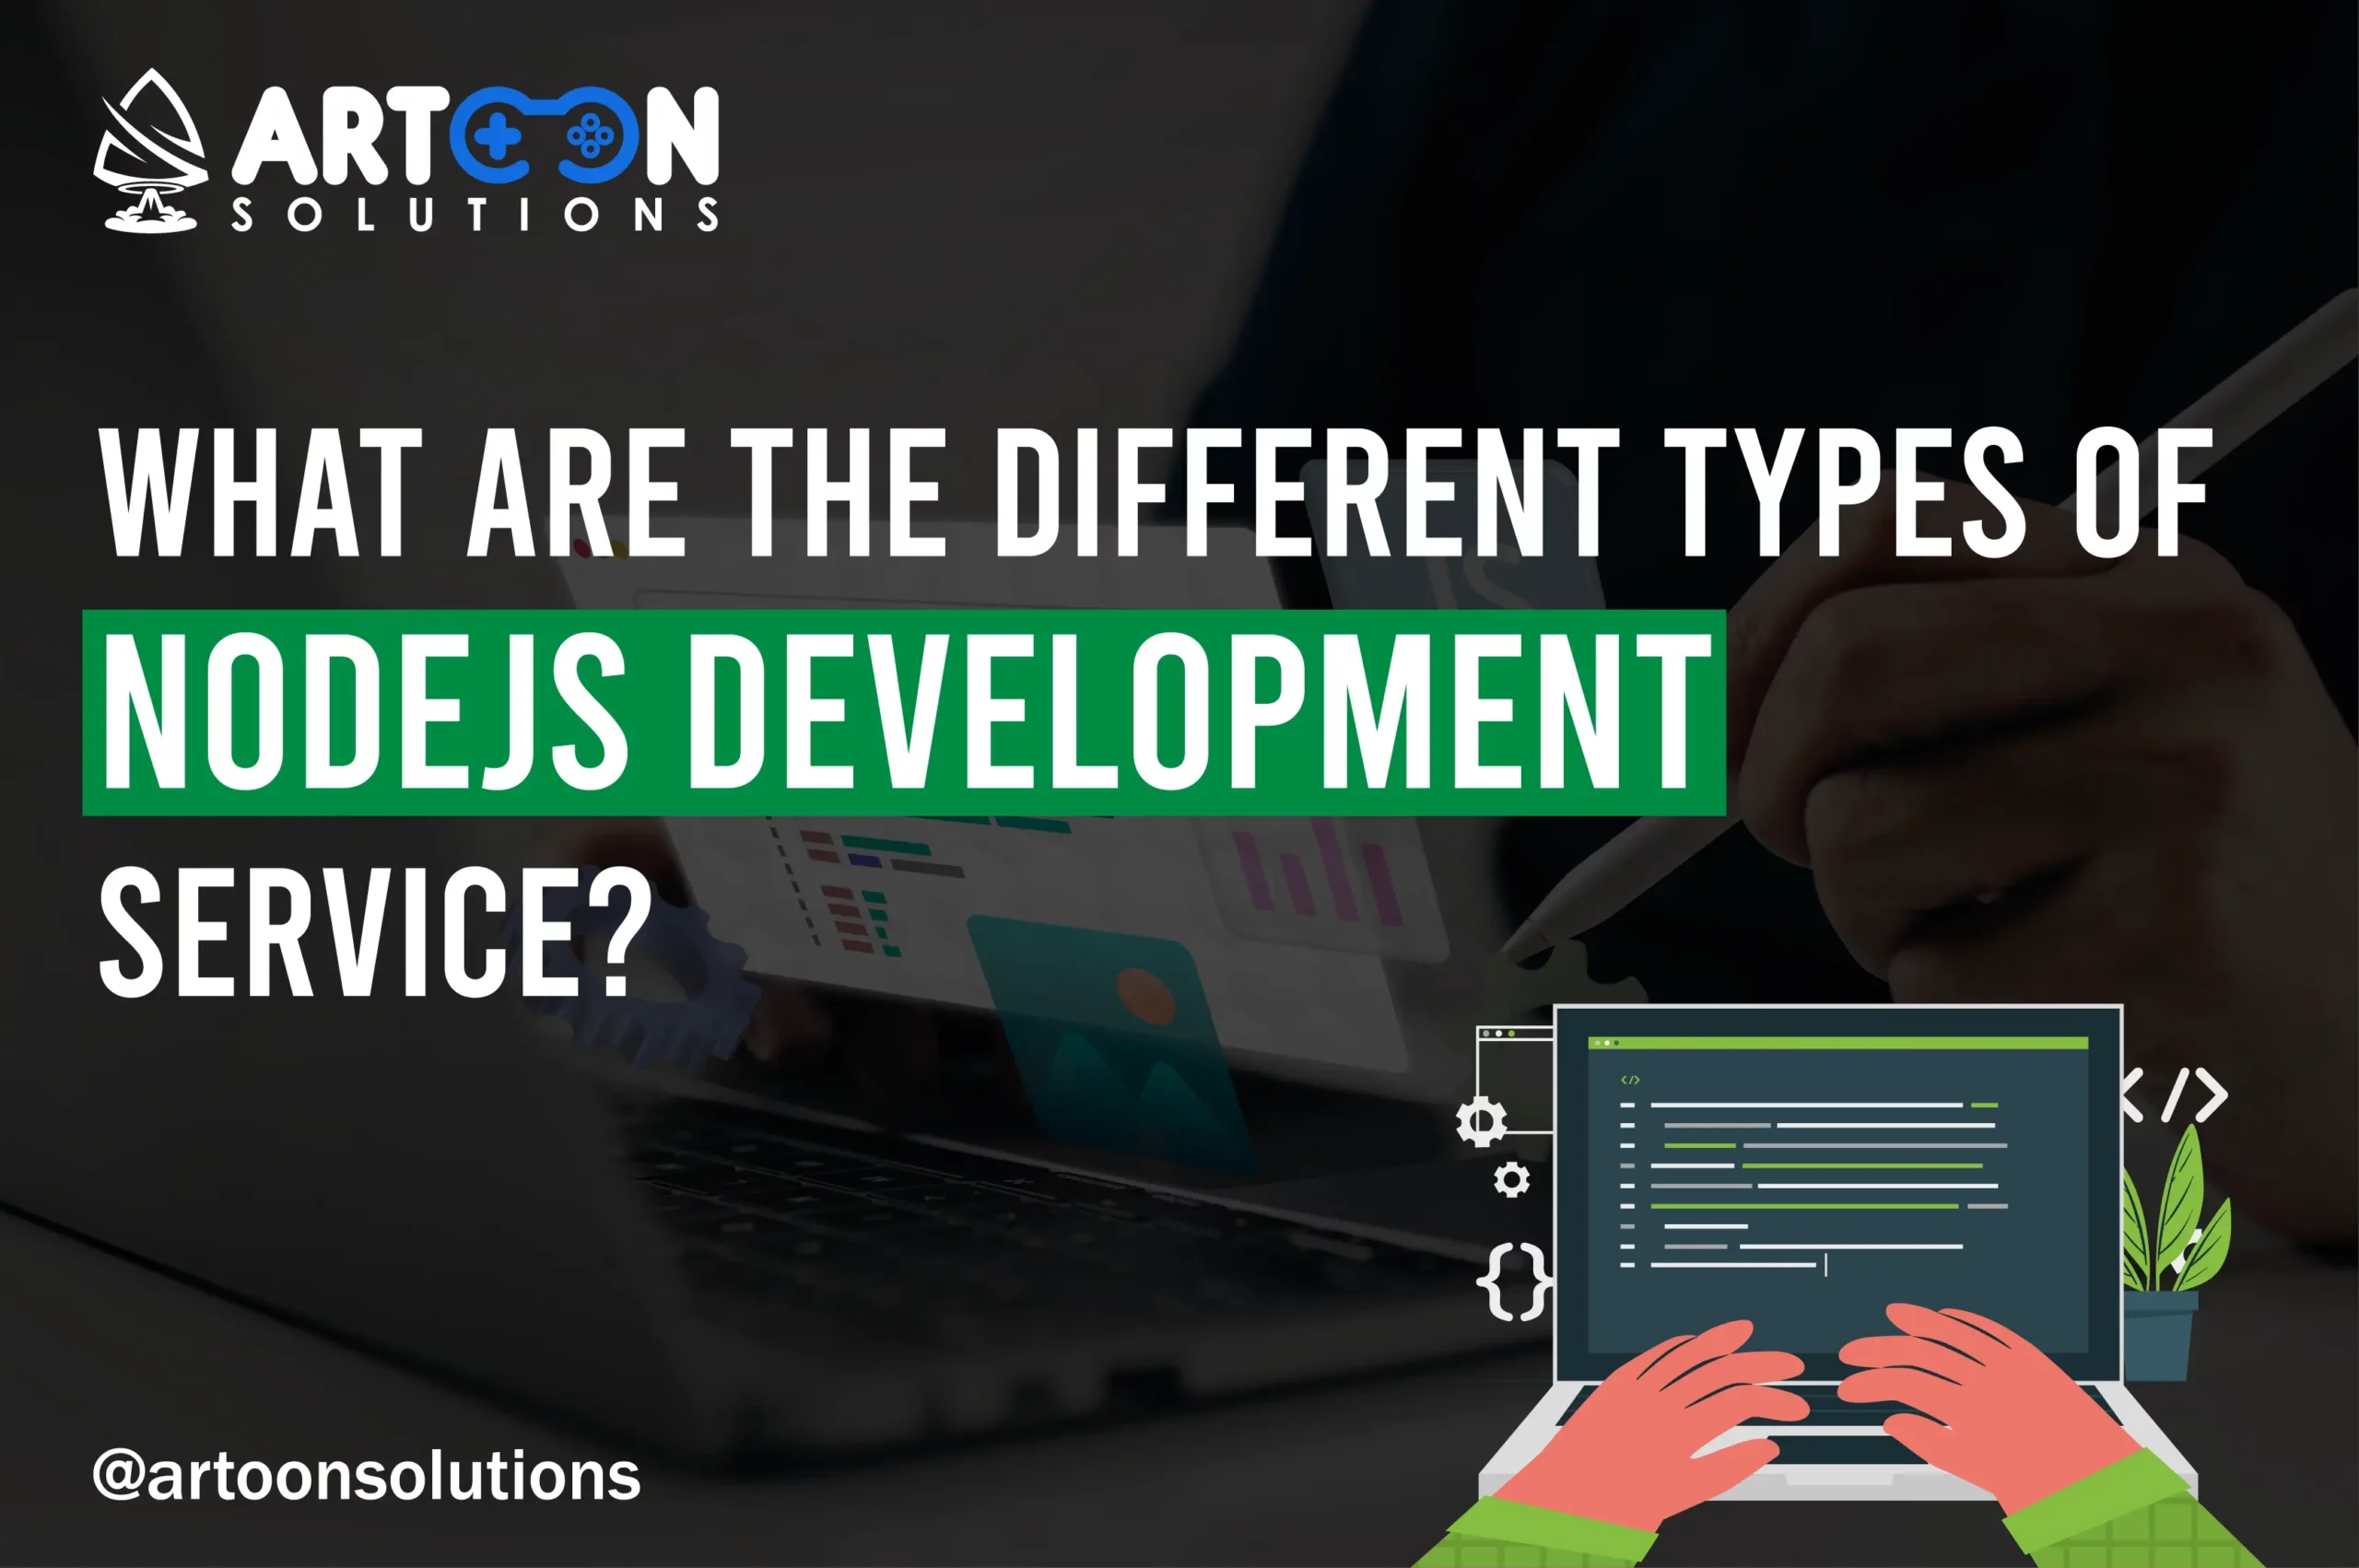 What are the Different Types of Nodejs Development Service?